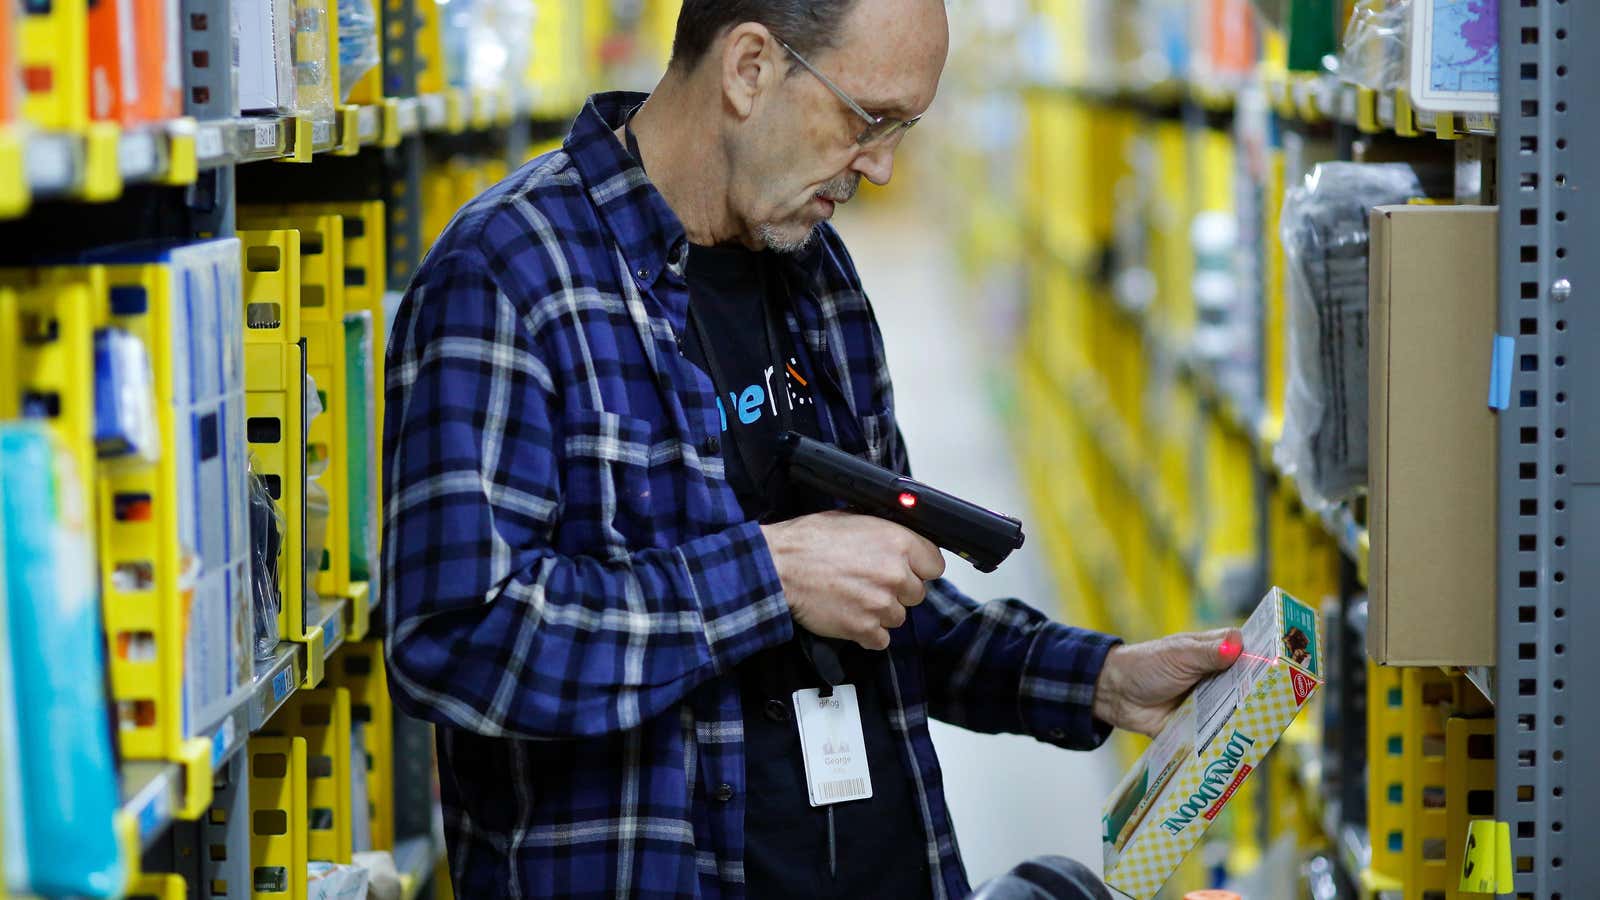 Amazon has patented a wristband for workers that it says could help guide them to the items they are picking from shelves.